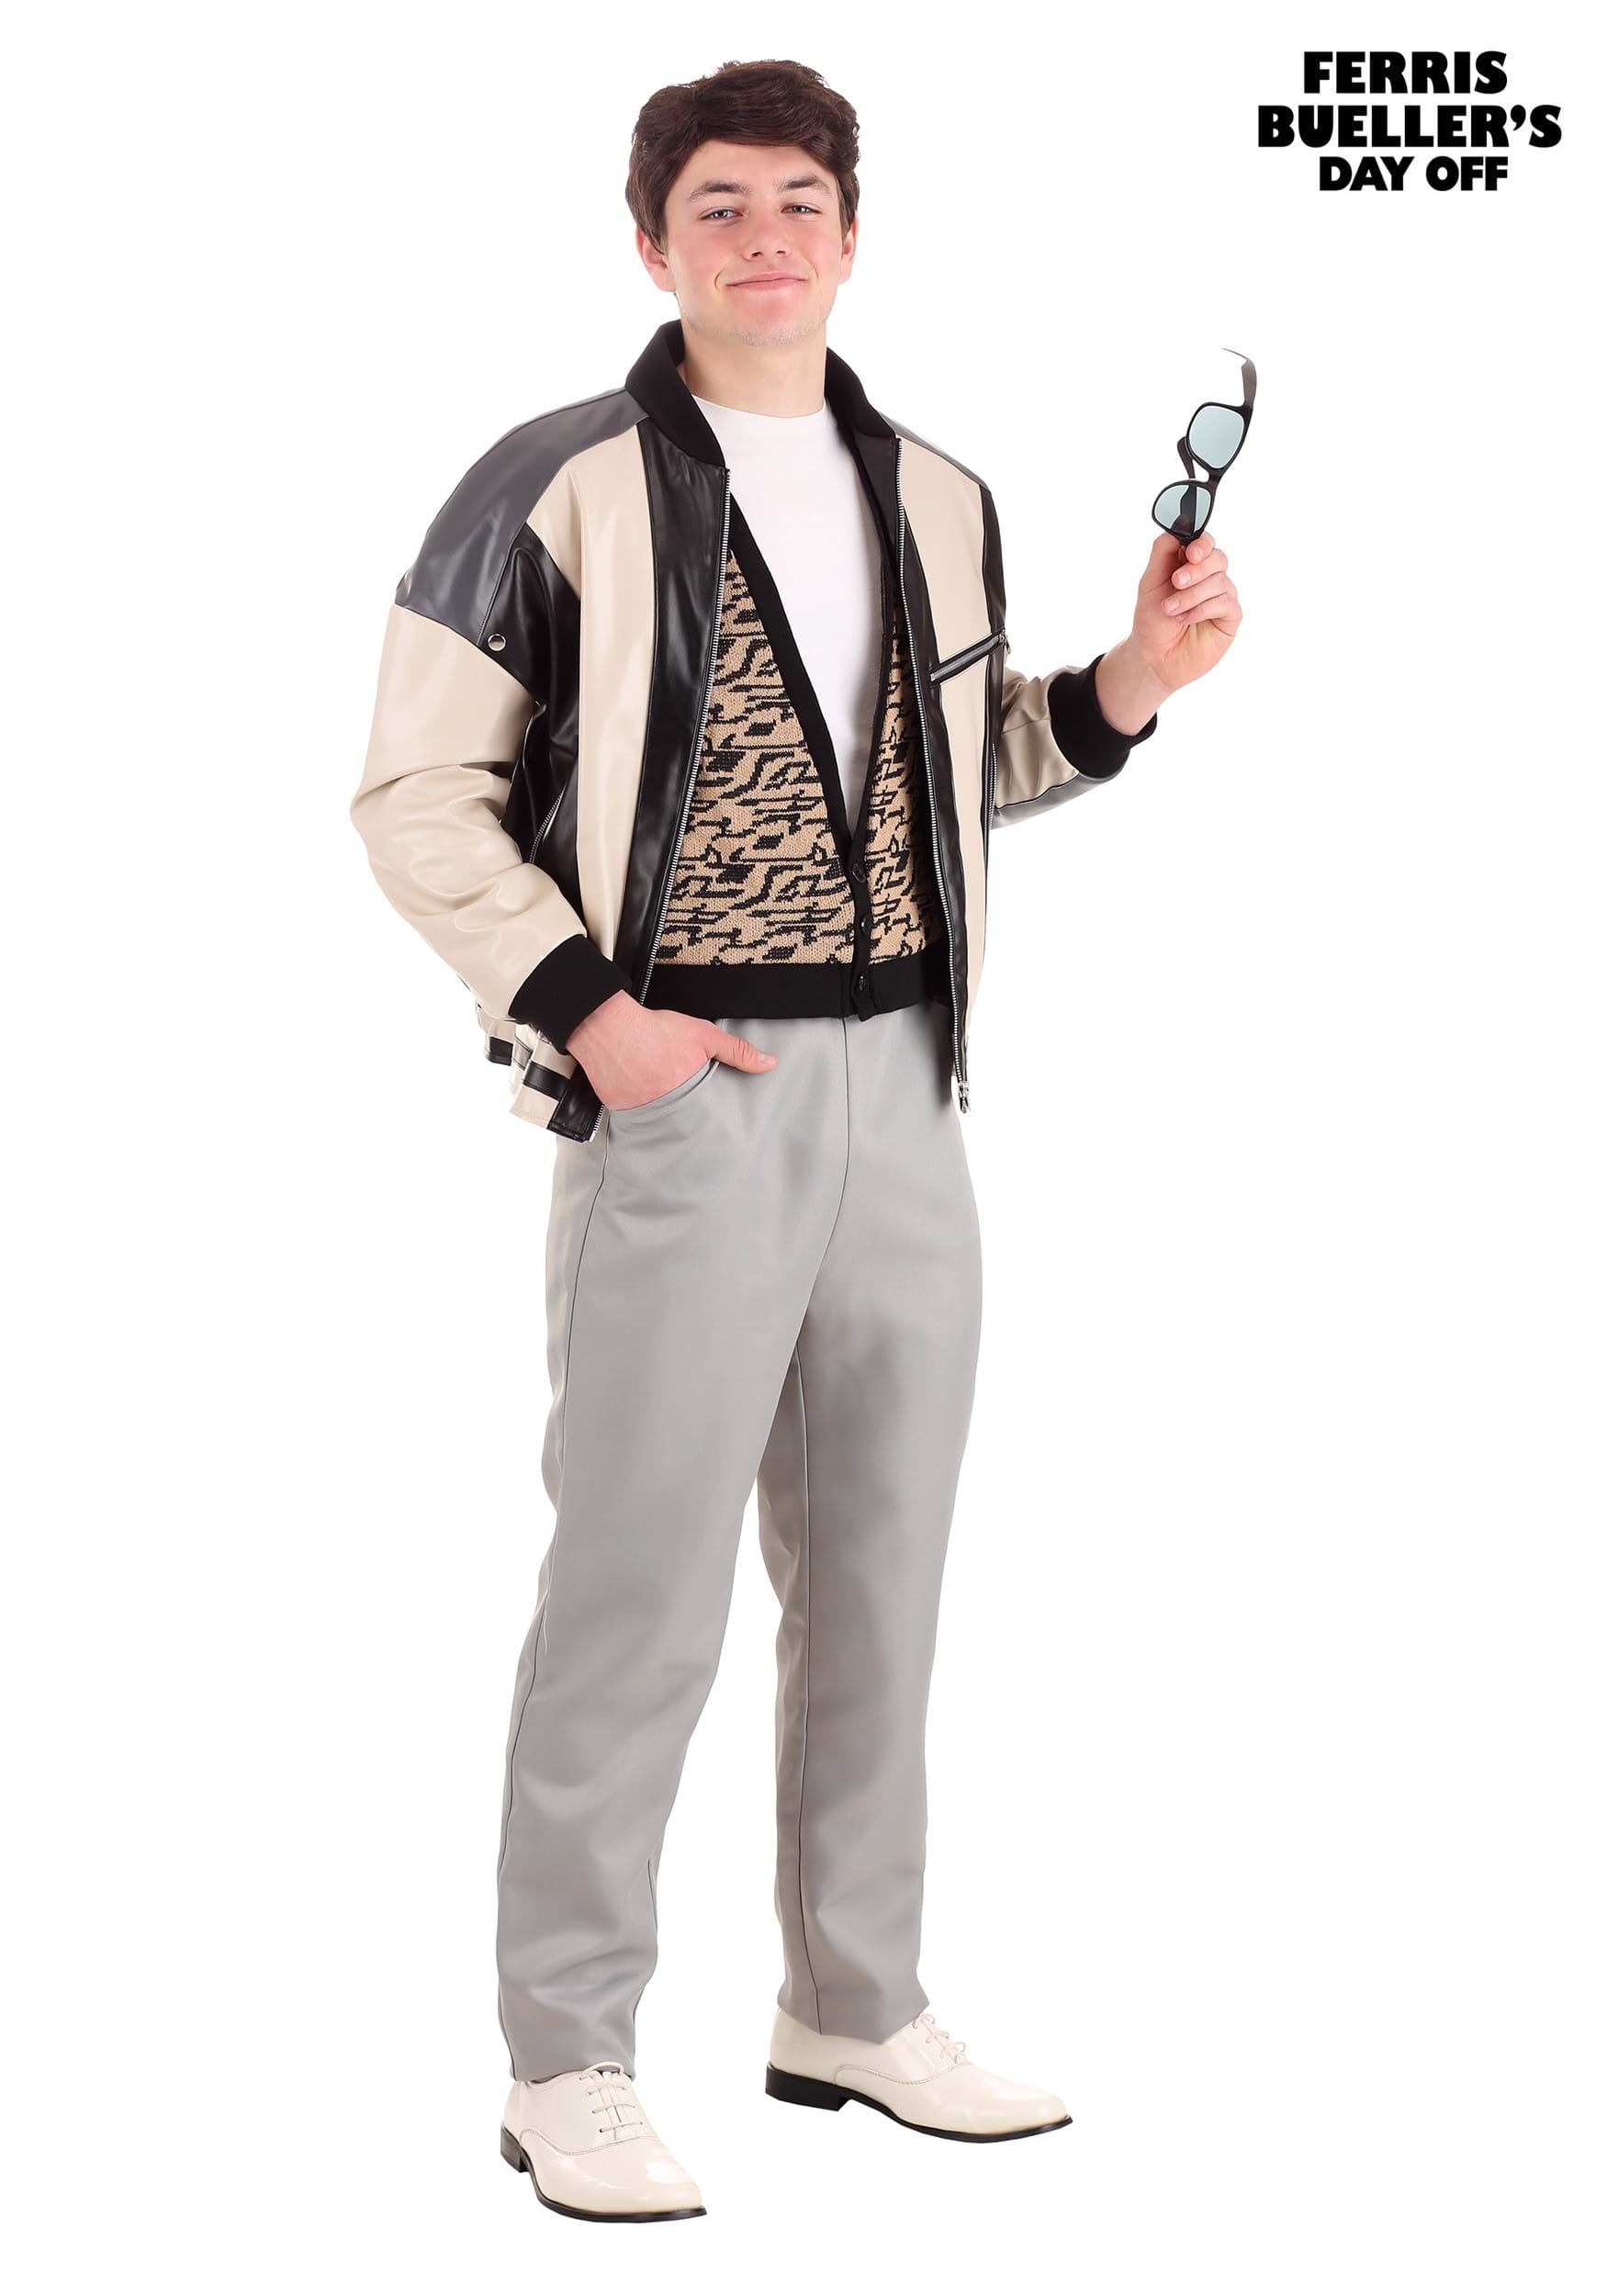 Ferris Bueller's Day Off Costumes